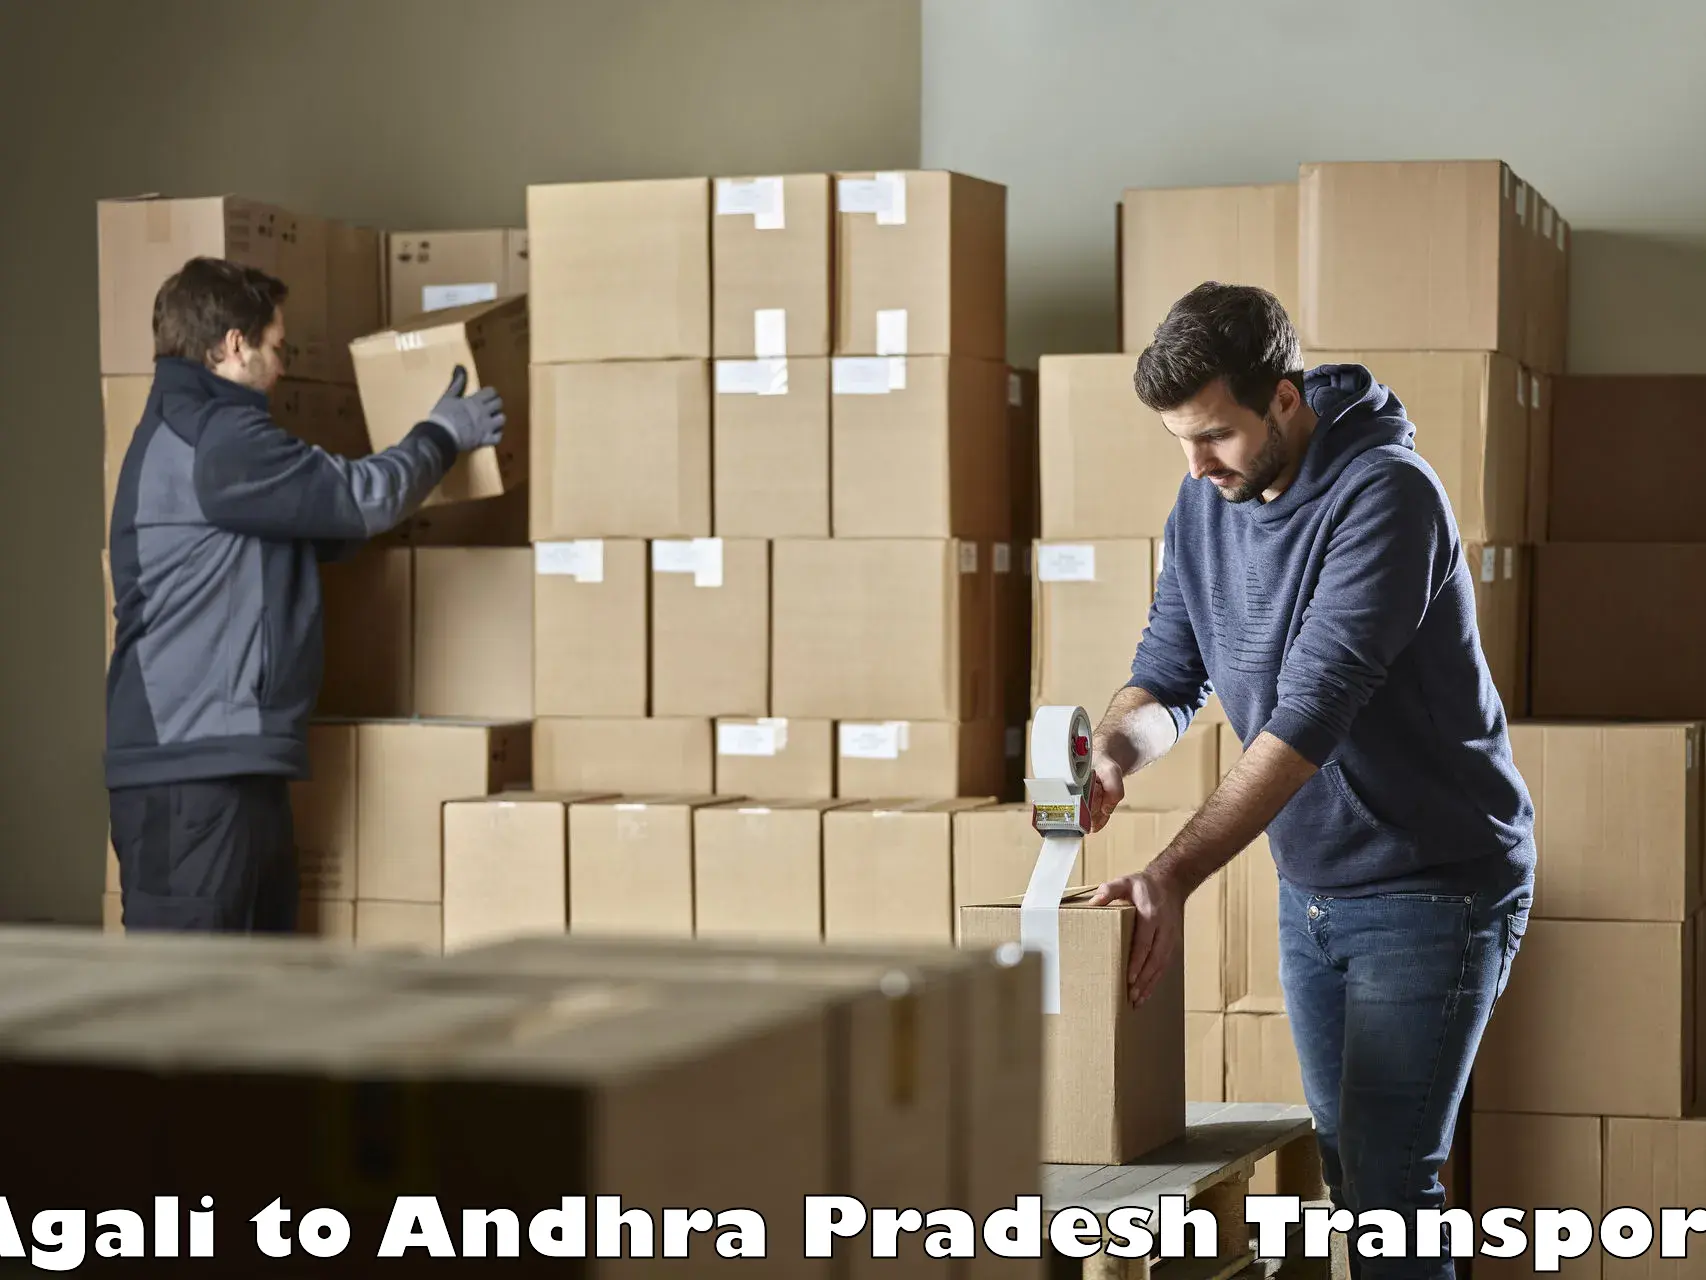 Truck transport companies in India Agali to Visakhapatnam Port